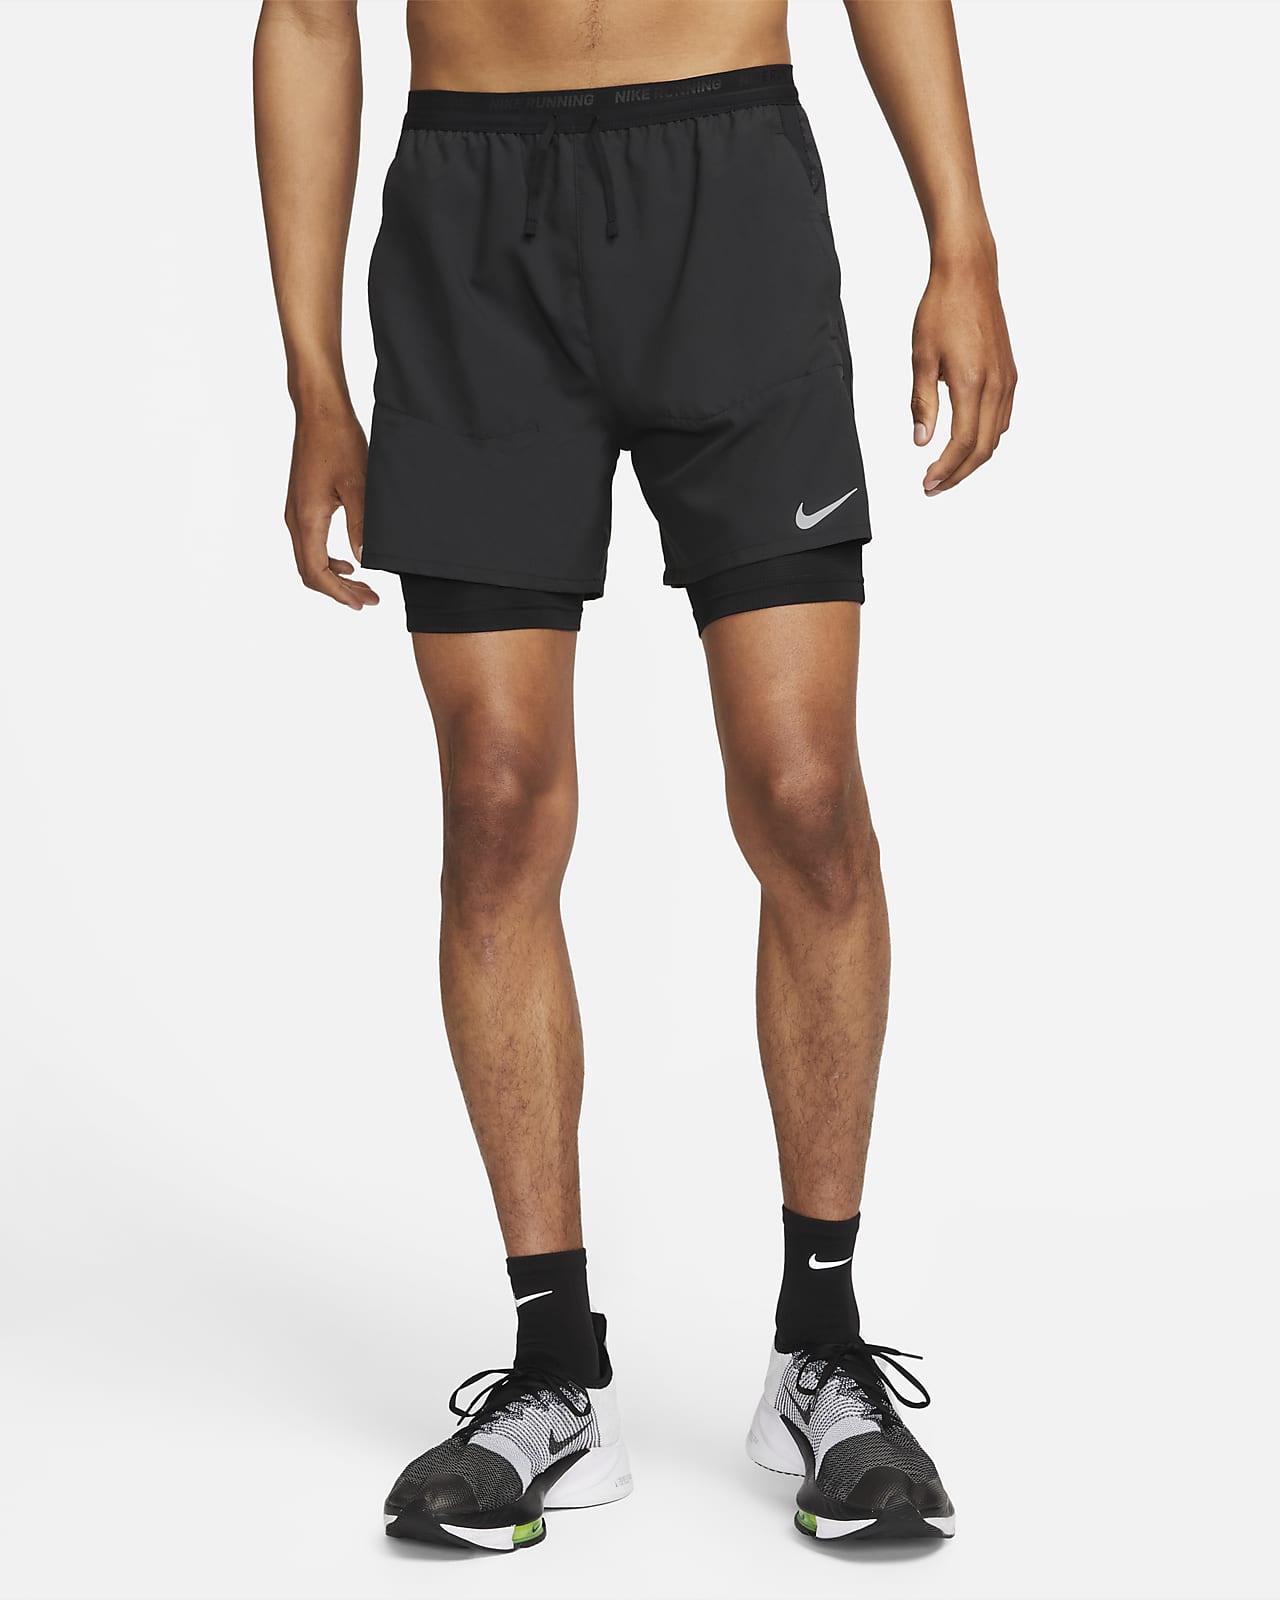 Loved one mouse Mediterranean Sea Nike Dri-FIT Stride Men's 5" 2-in-1 Running Shorts. Nike.com